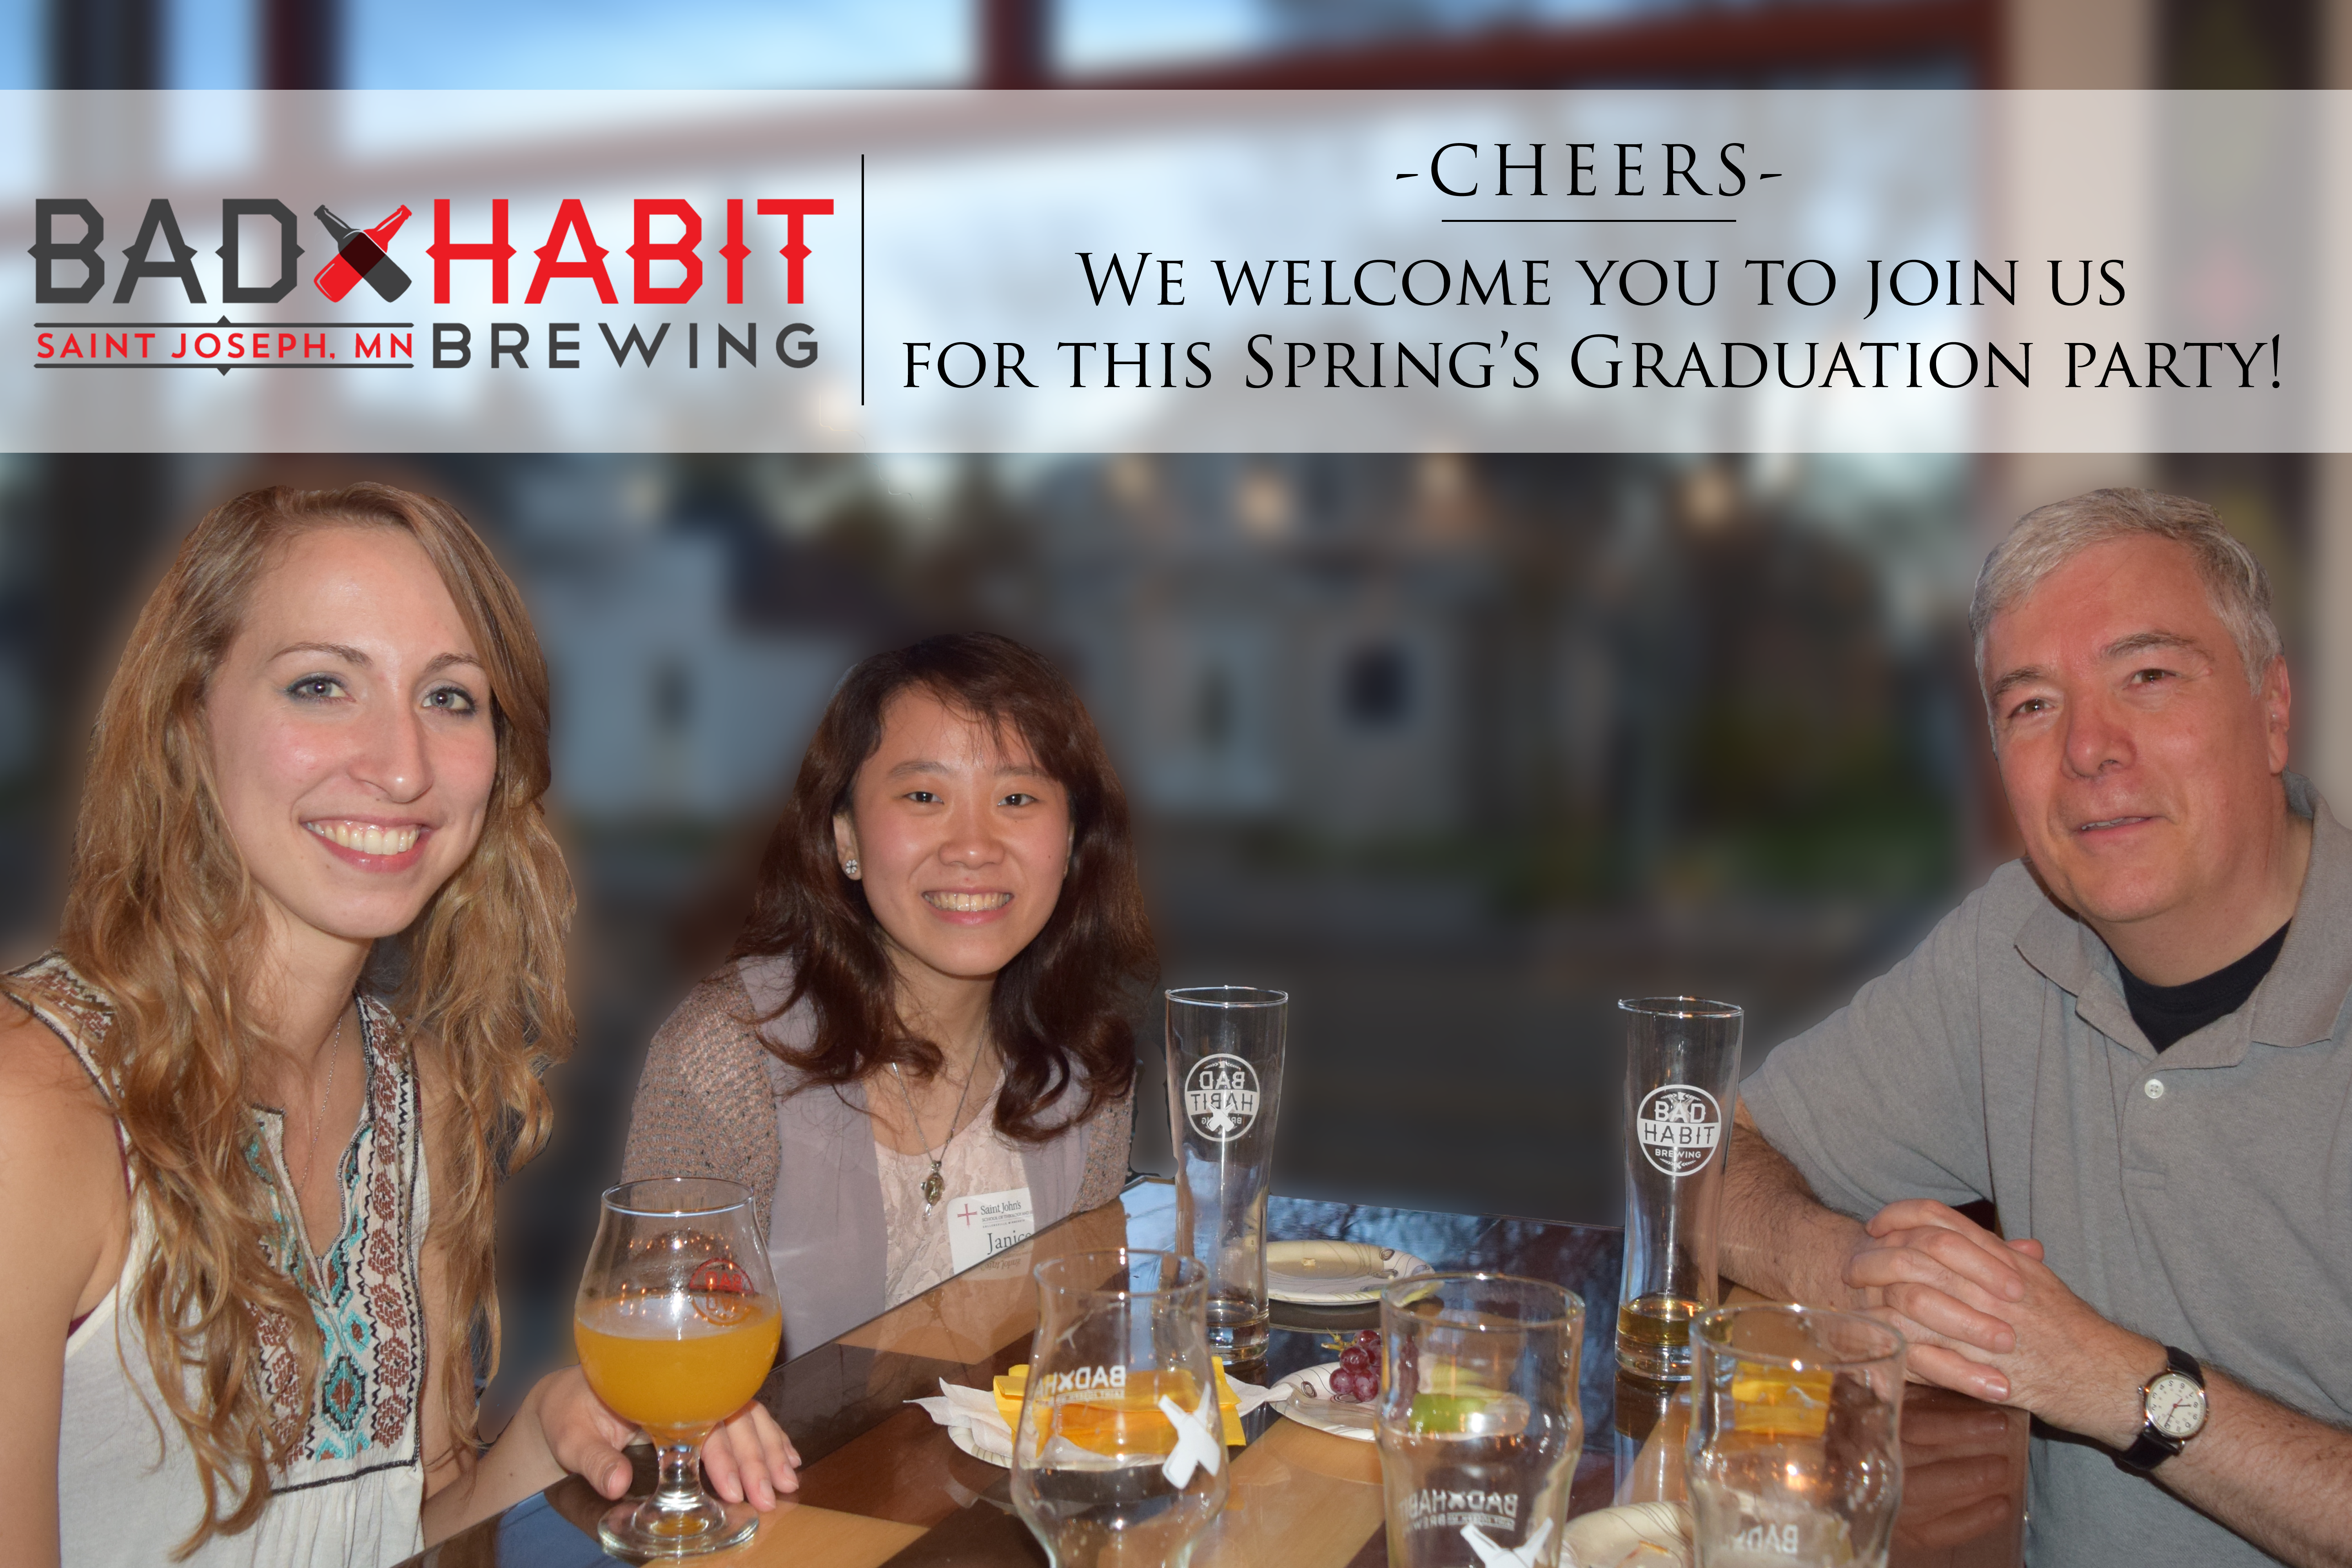 Cheers - Join us at Bad Habit